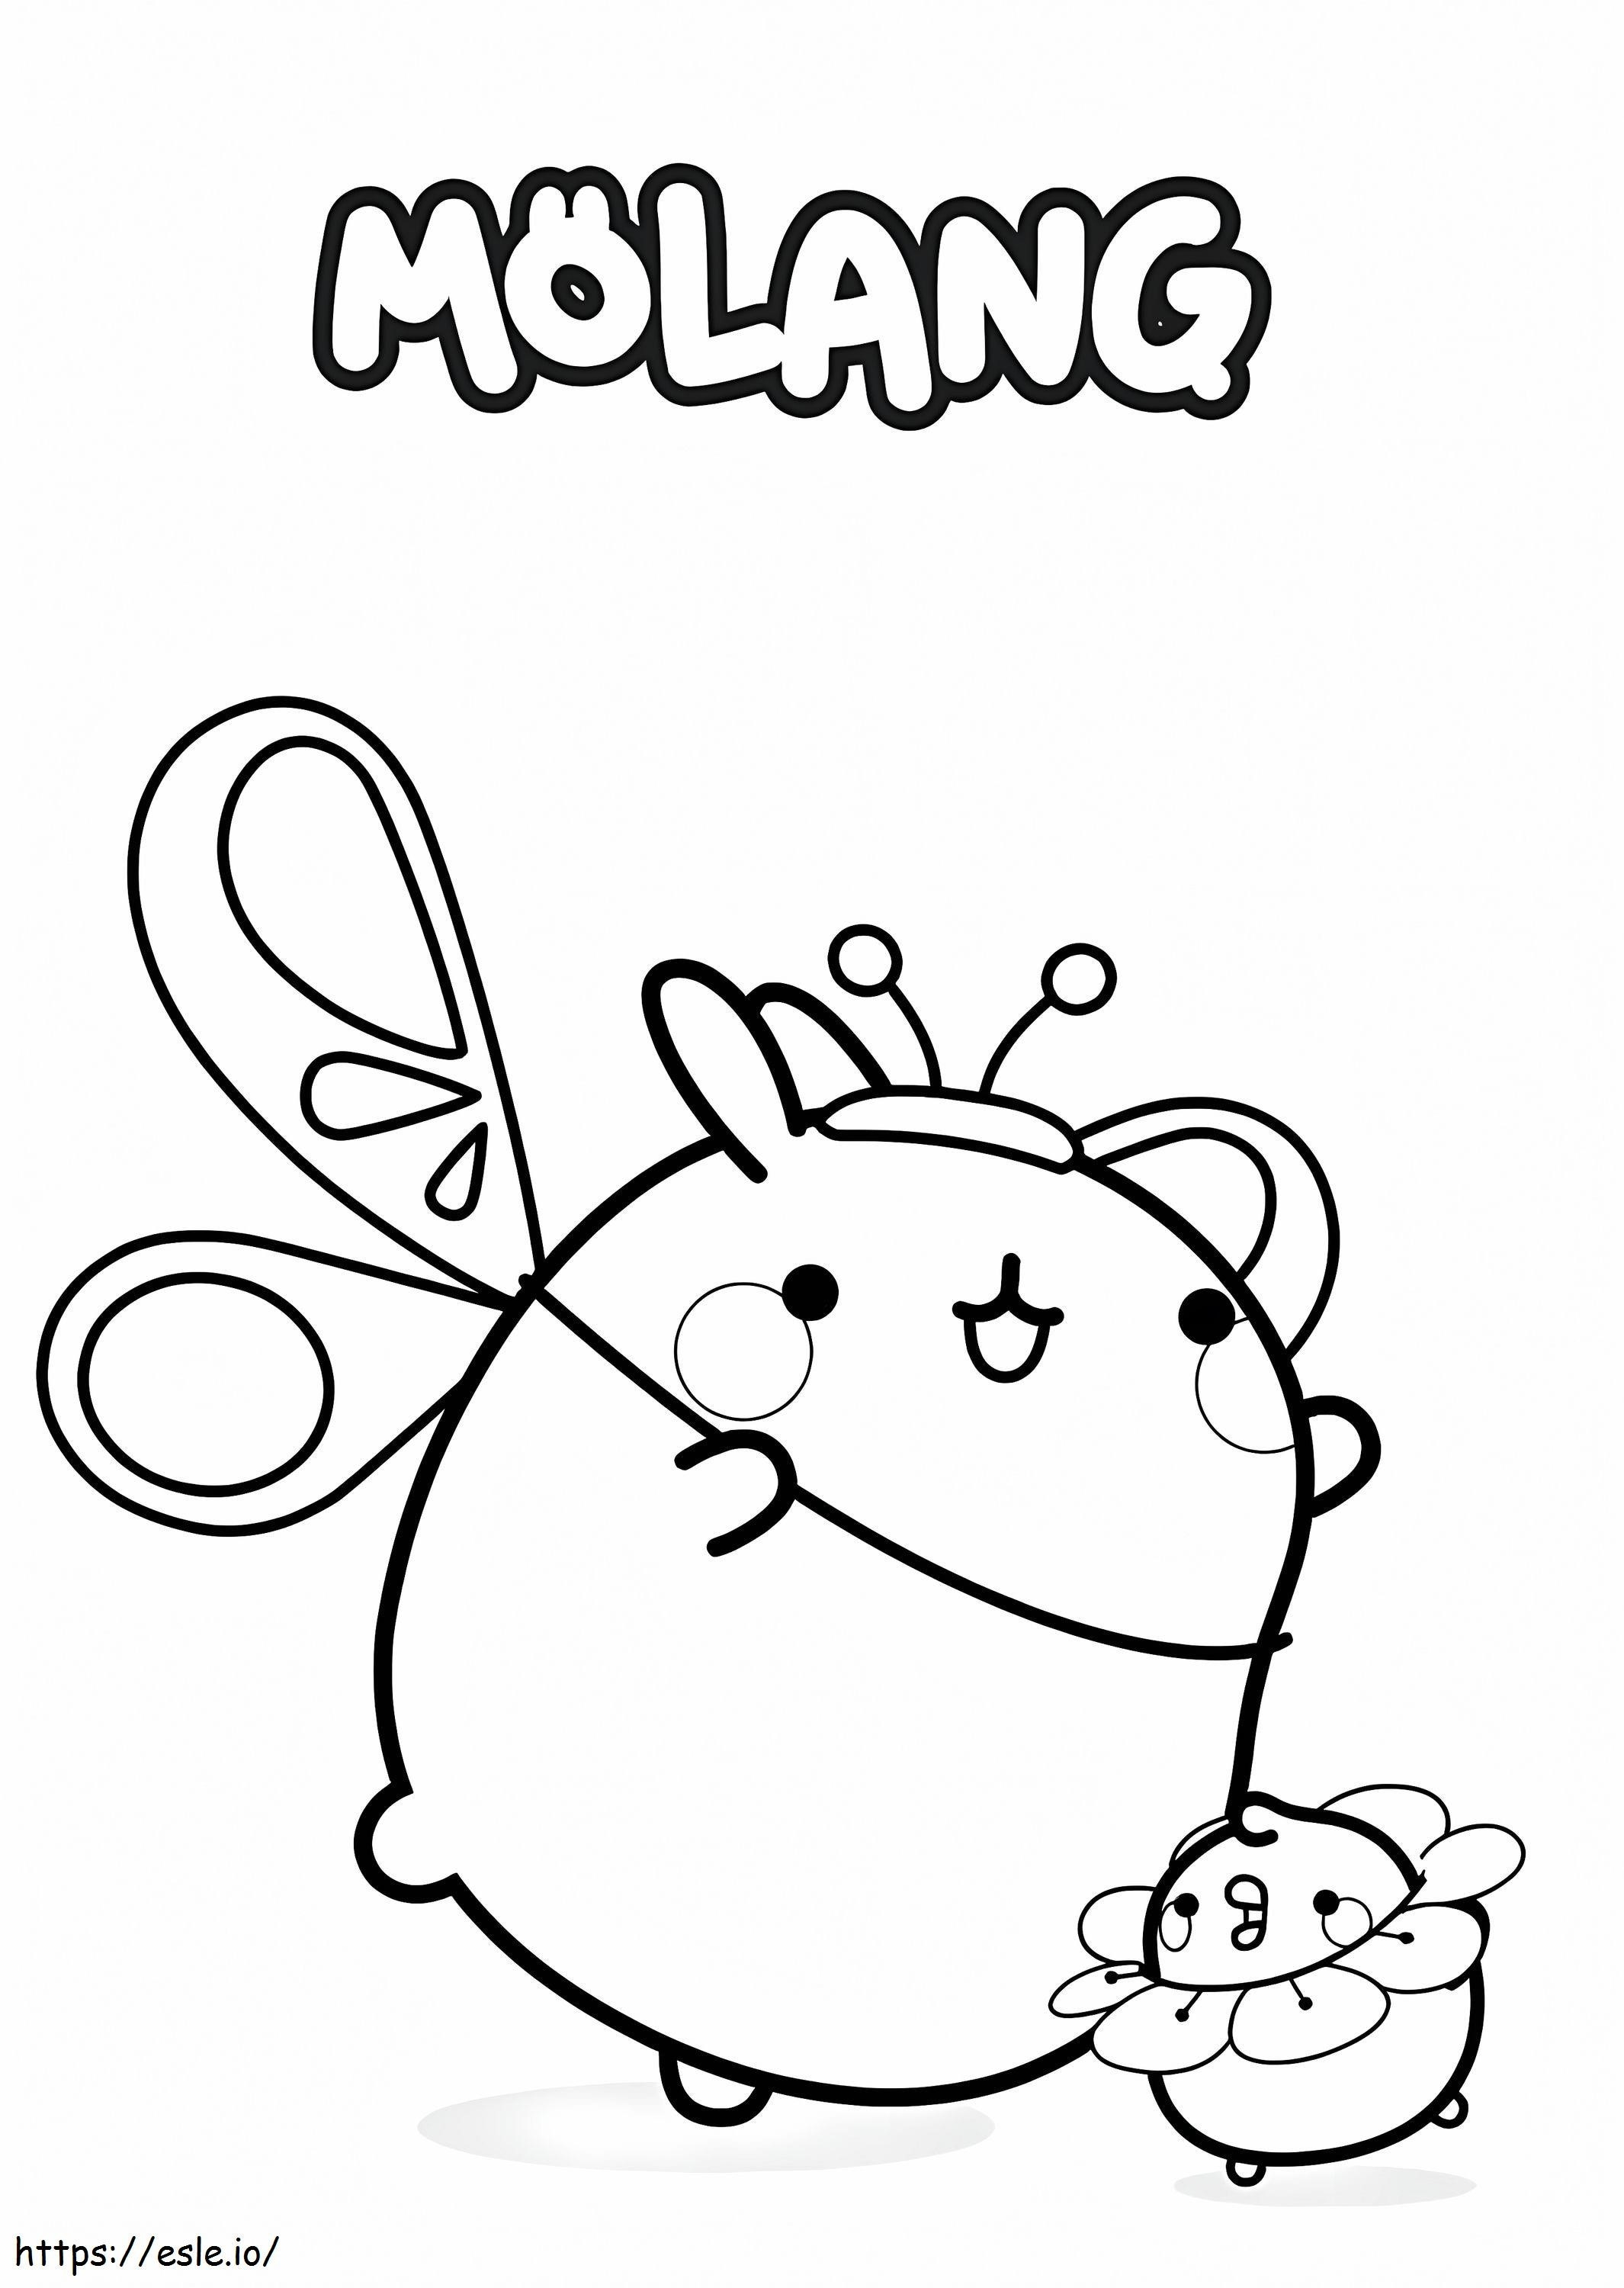 Dear Butterfly coloring page